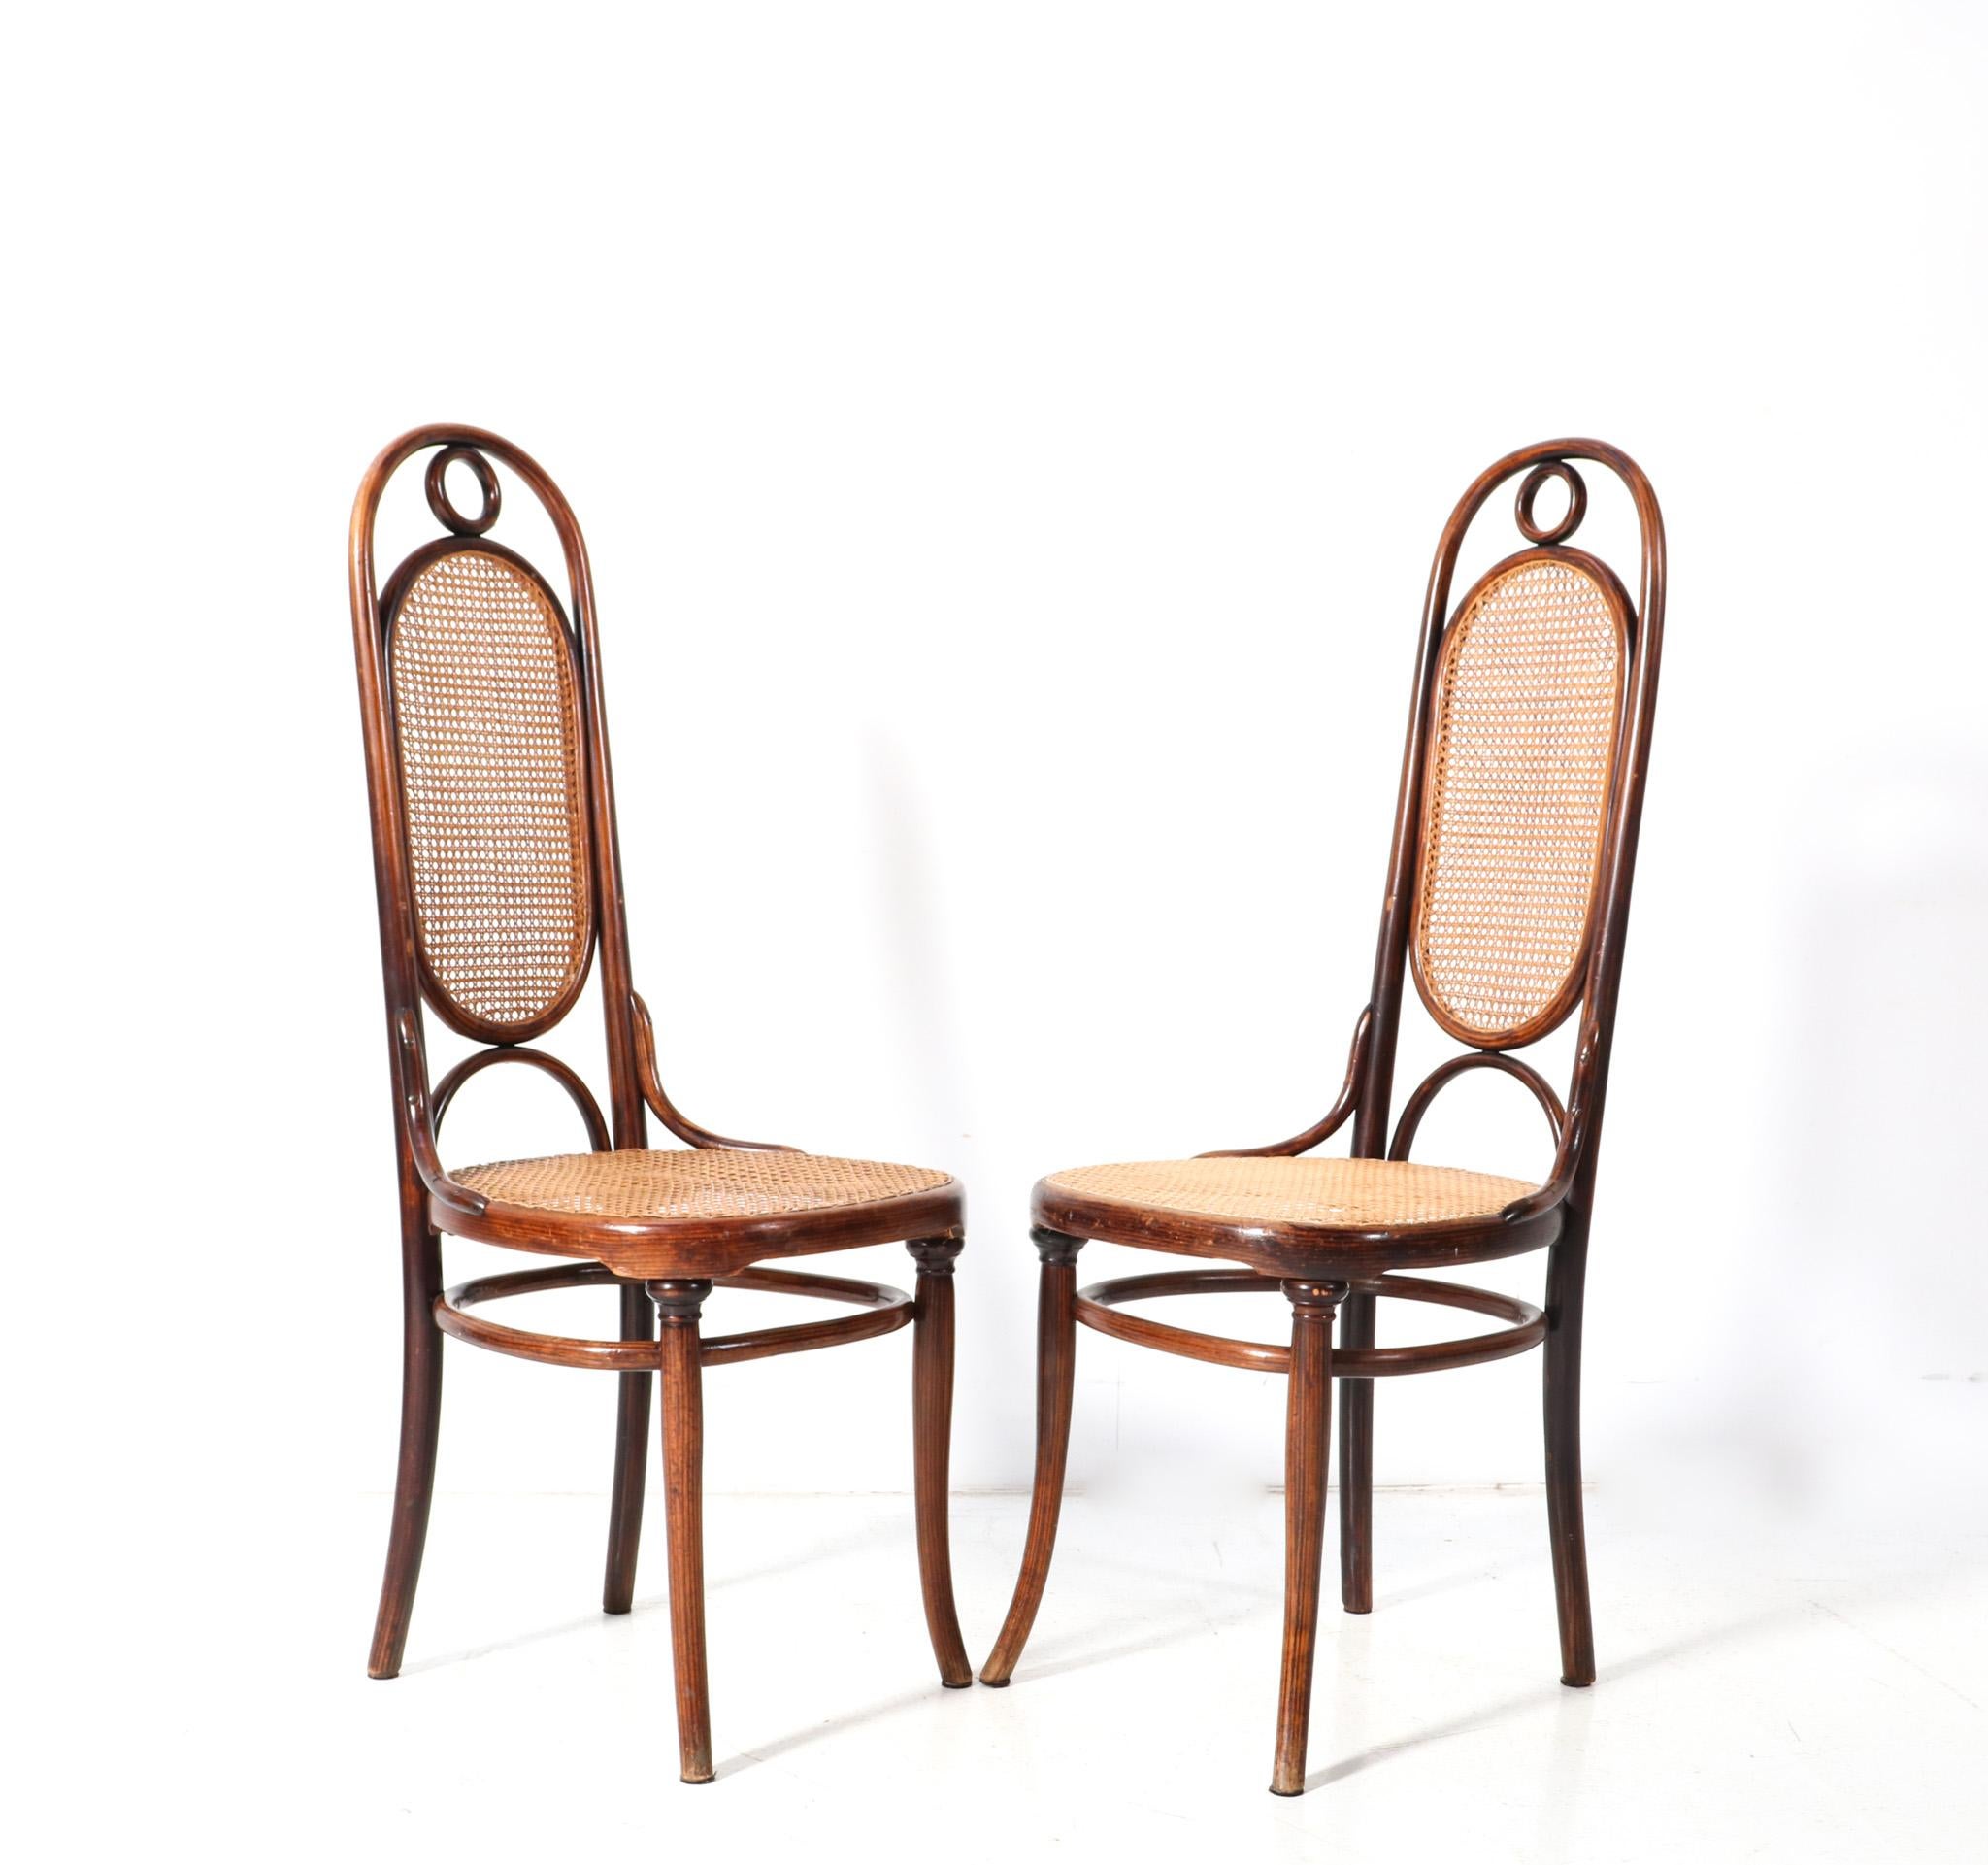 Pair of Beech Art Nouveau High Back Chairs Model 17 by Michael Thonet, 1890s For Sale 1